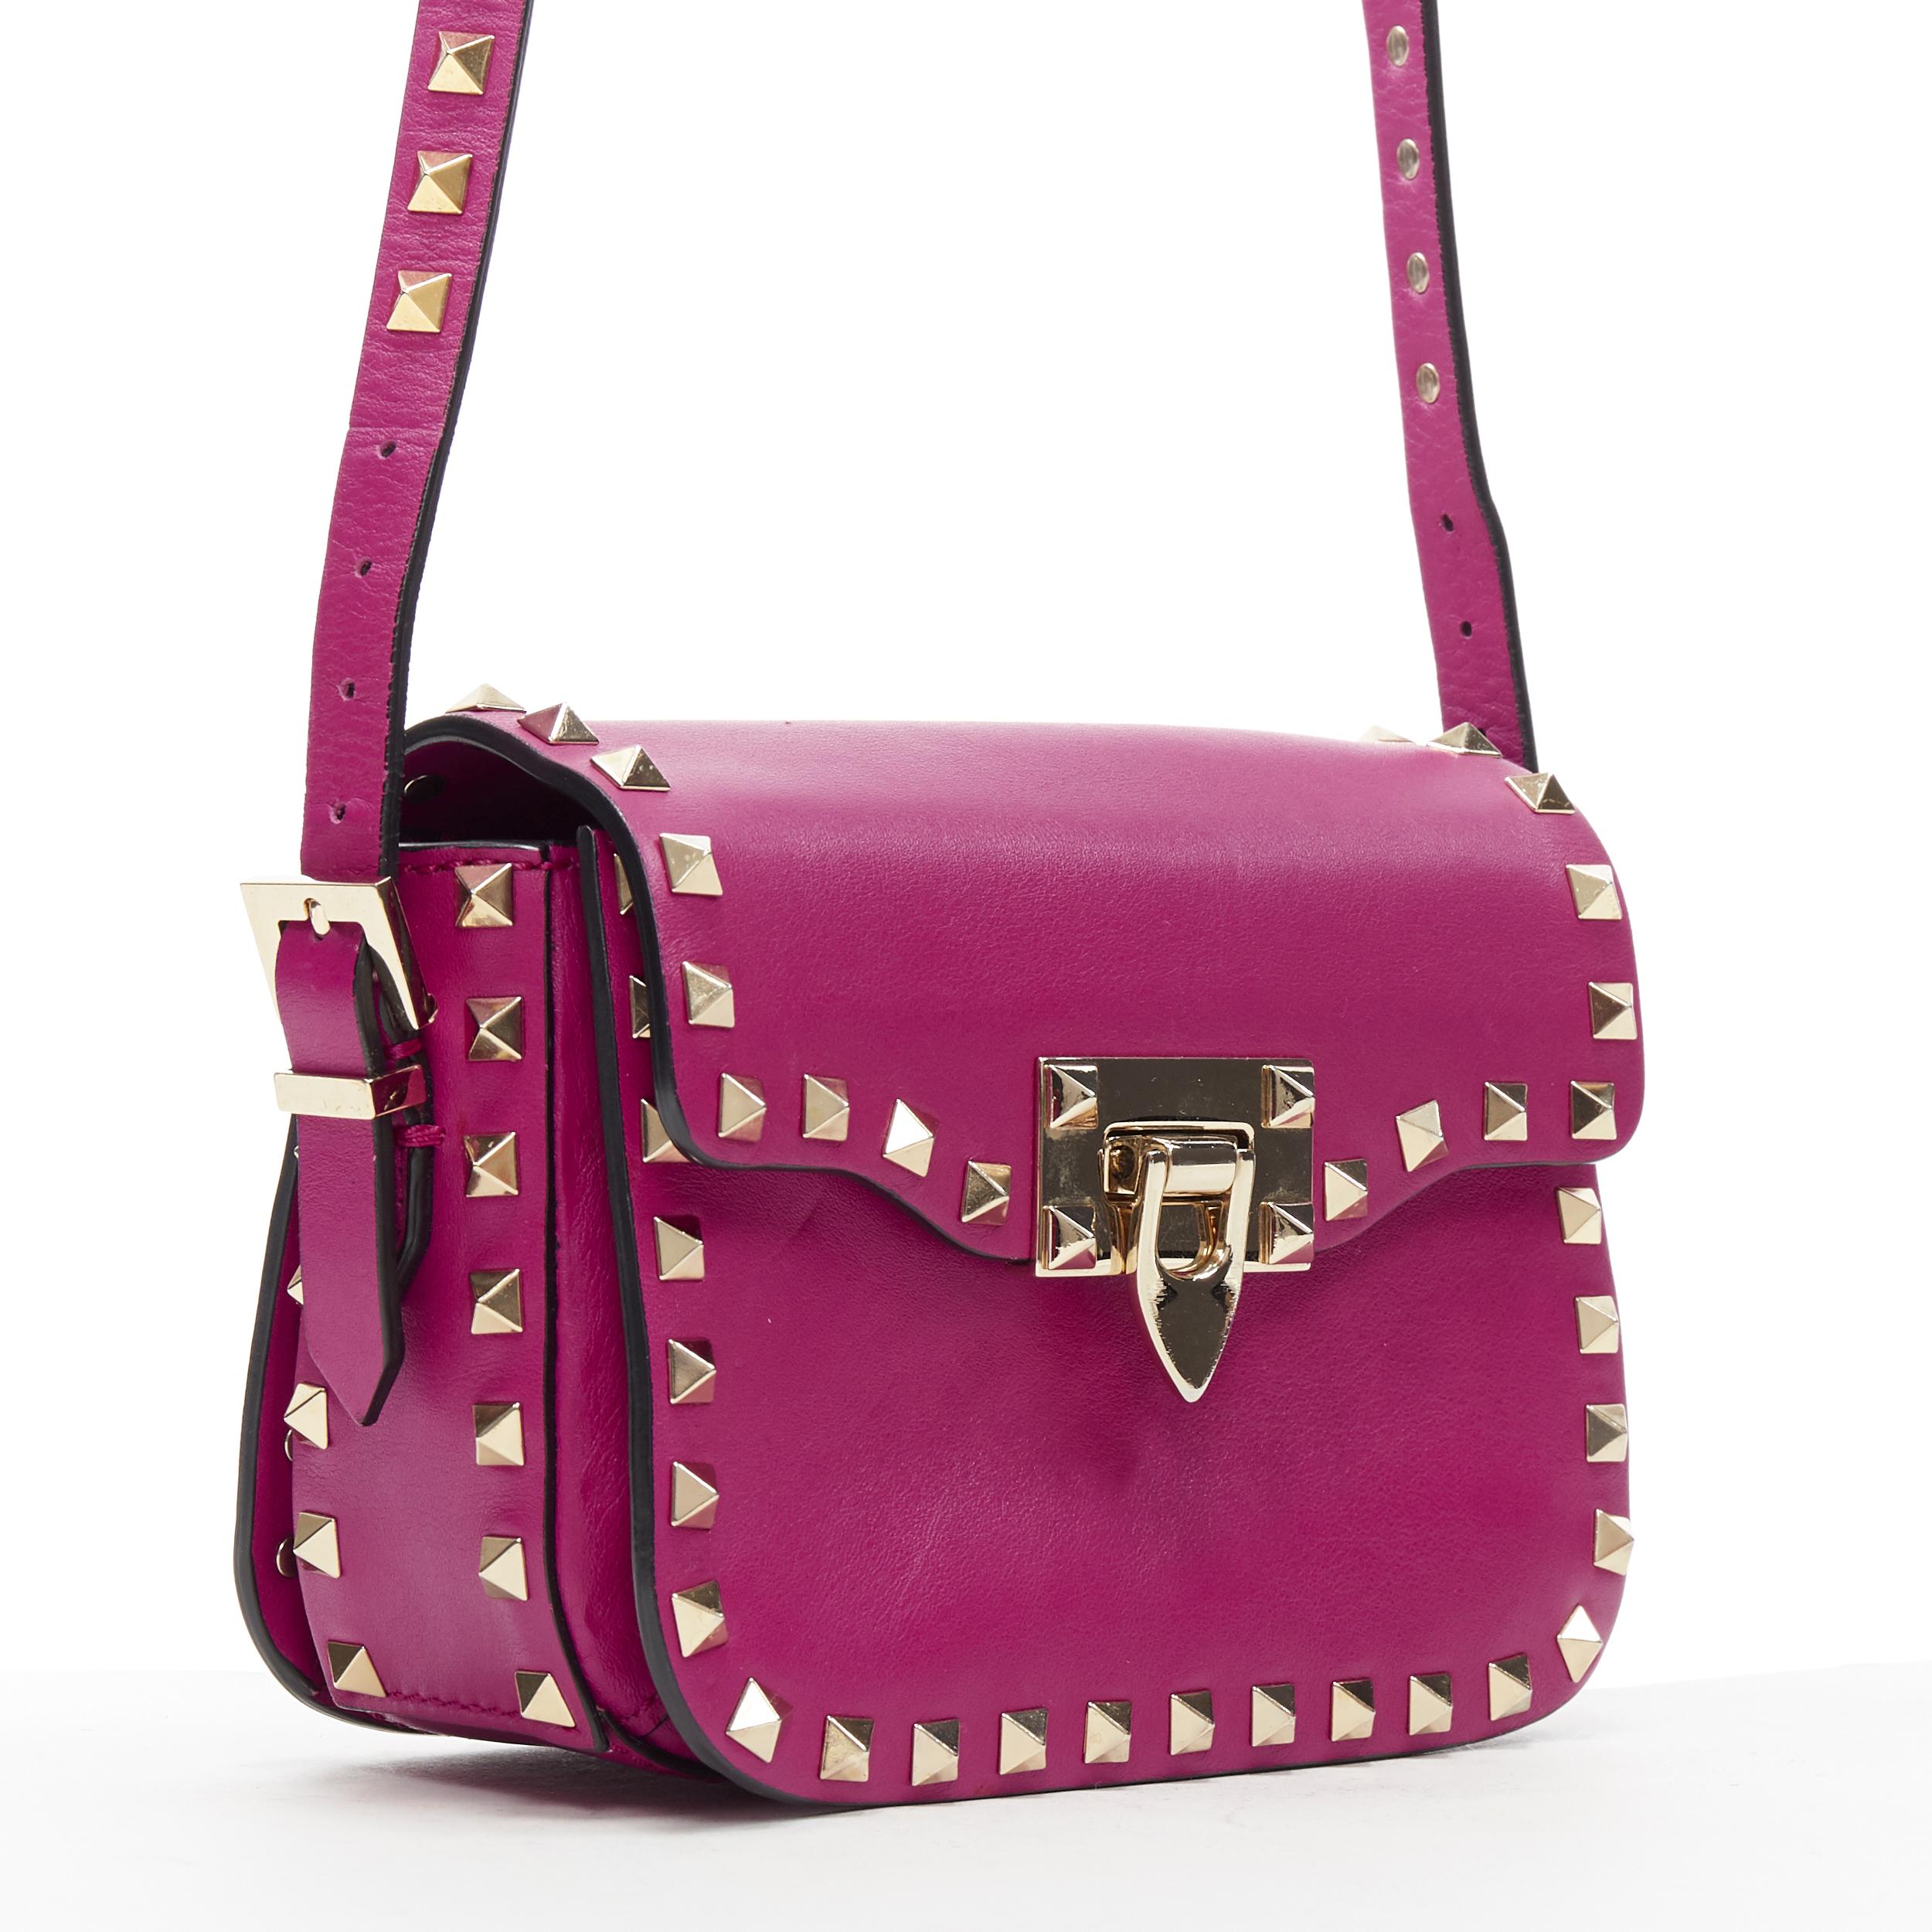 VALENTINO Rockstud purple gold stud leather flap clash small shoulder bag
Brand: Valentino
Model Name / Style: Rockstud bag
Material: Leather
Color: Purple
Pattern: Solid
Closure: Clasp
Extra Detail:
Made in: Italy

CONDITION: 
Condition: Good, this